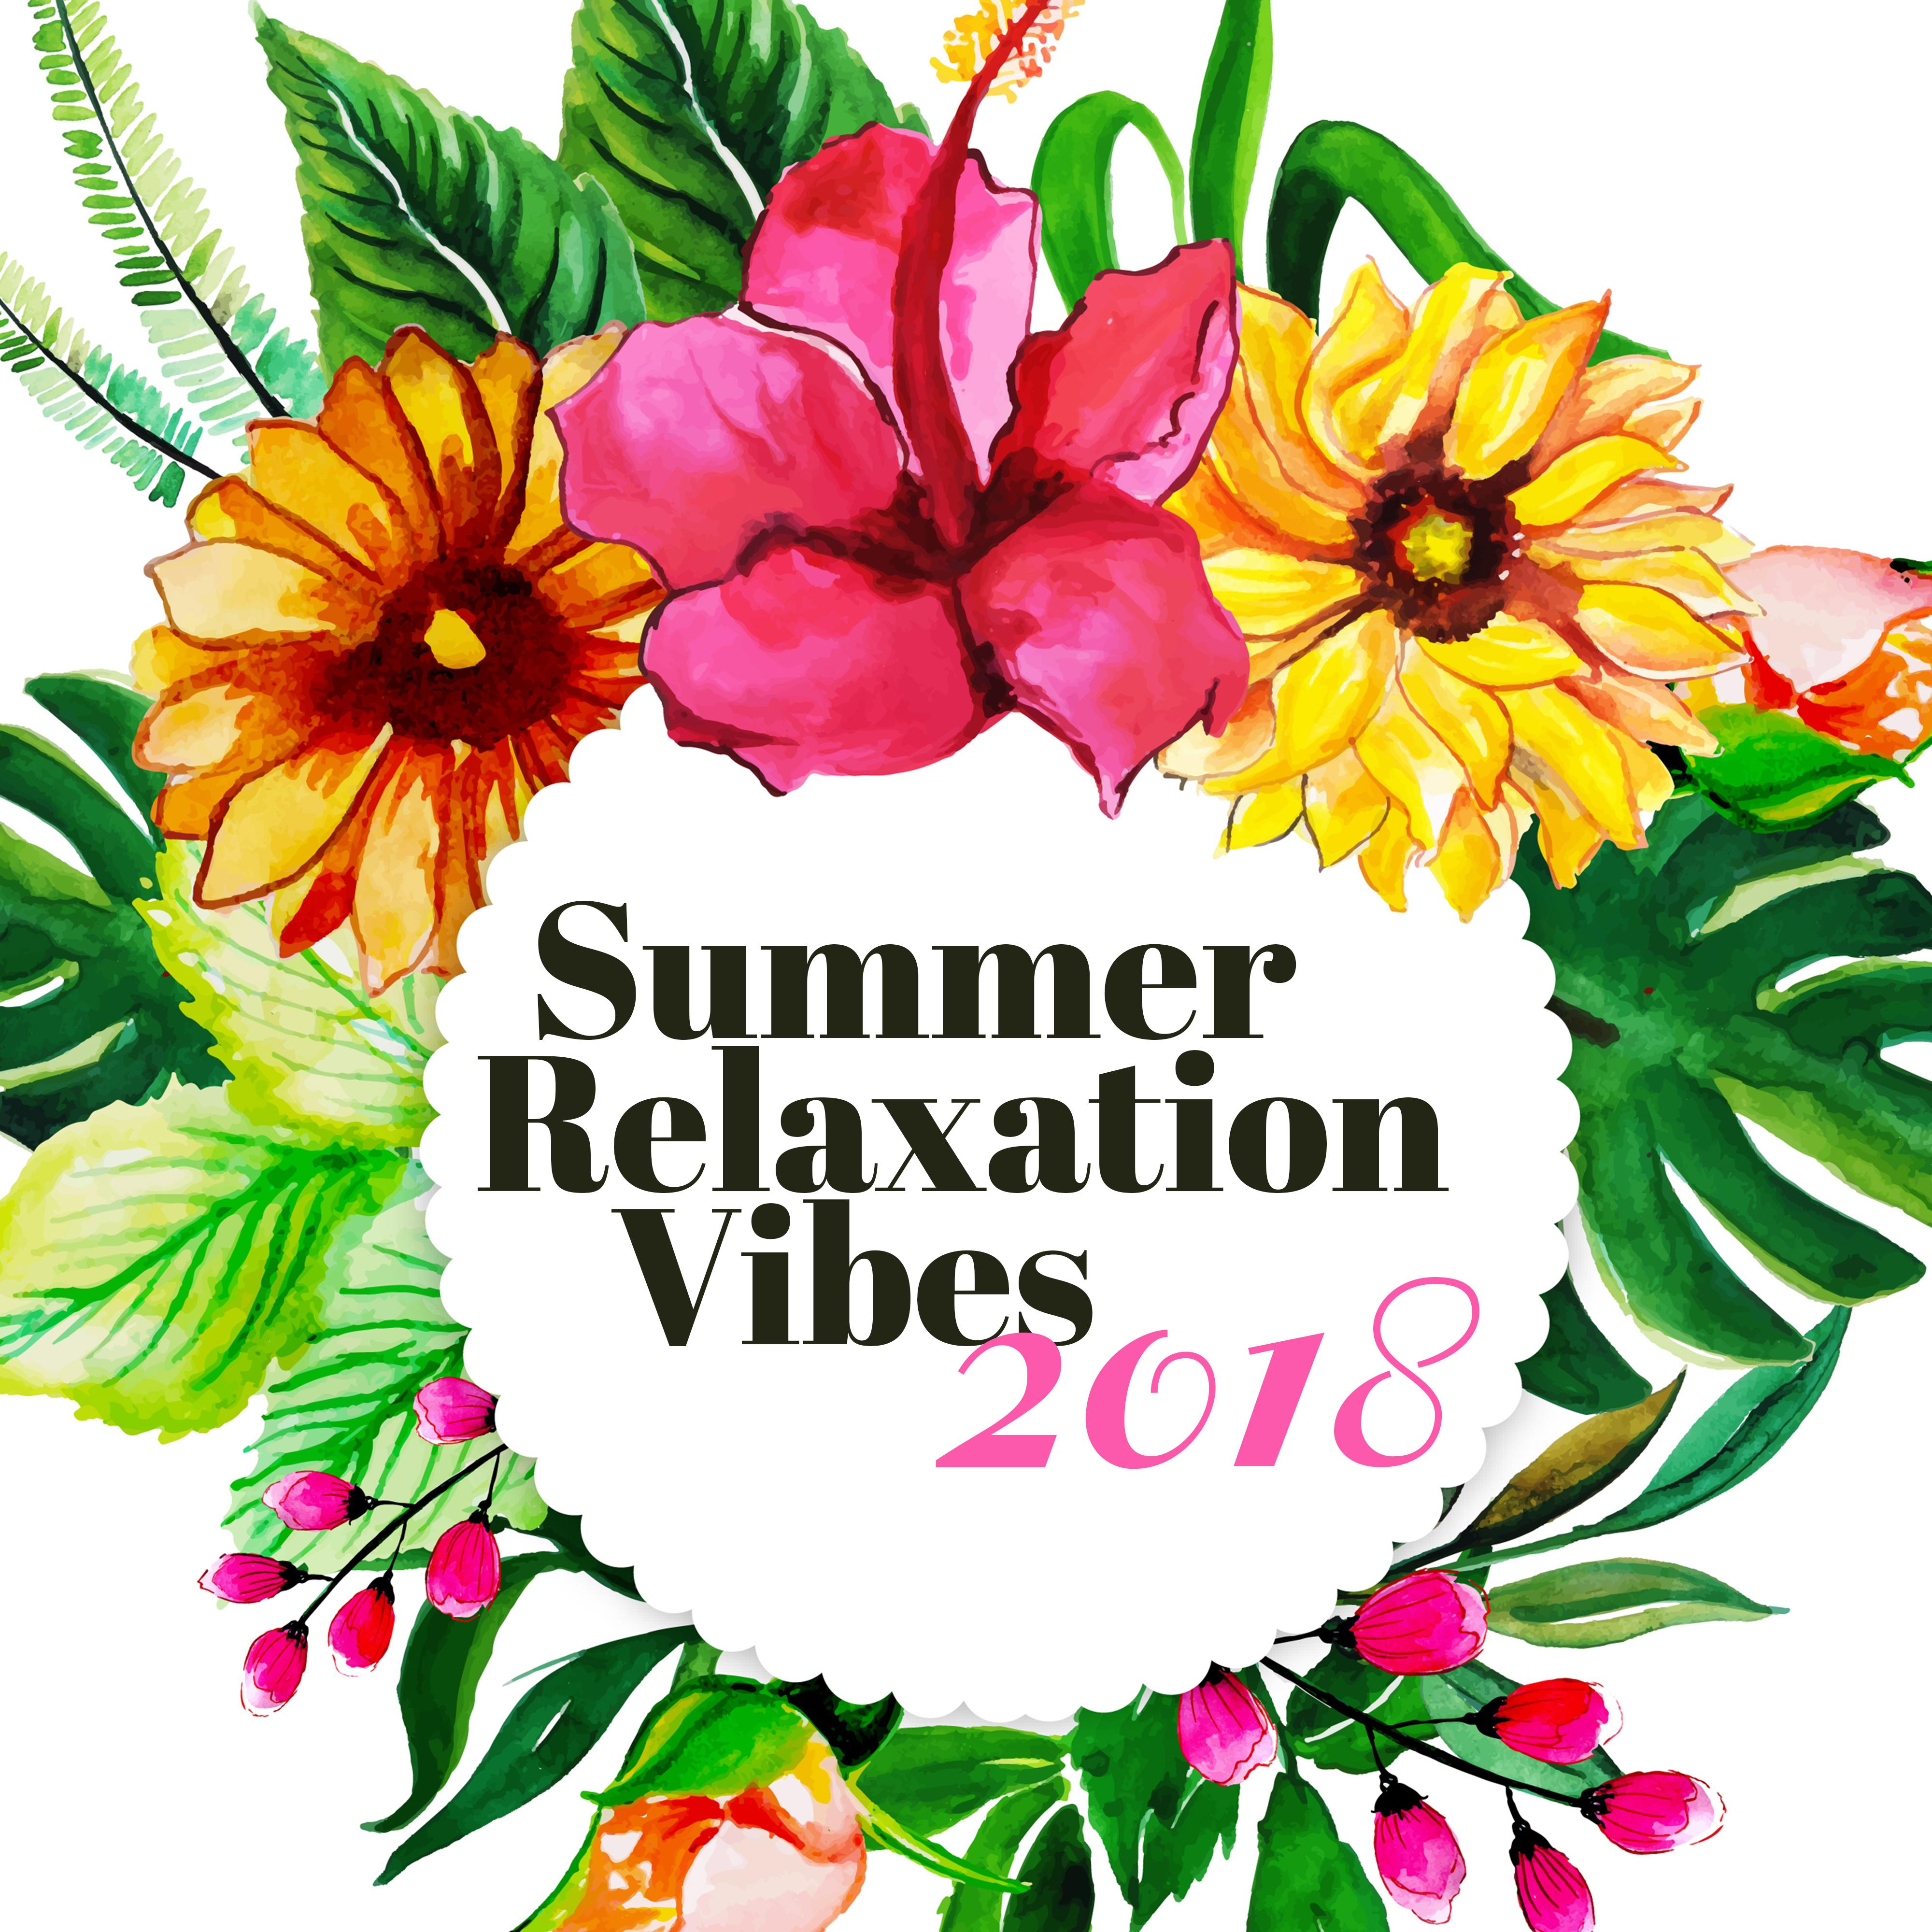 Summer Relaxation Vibes 2018